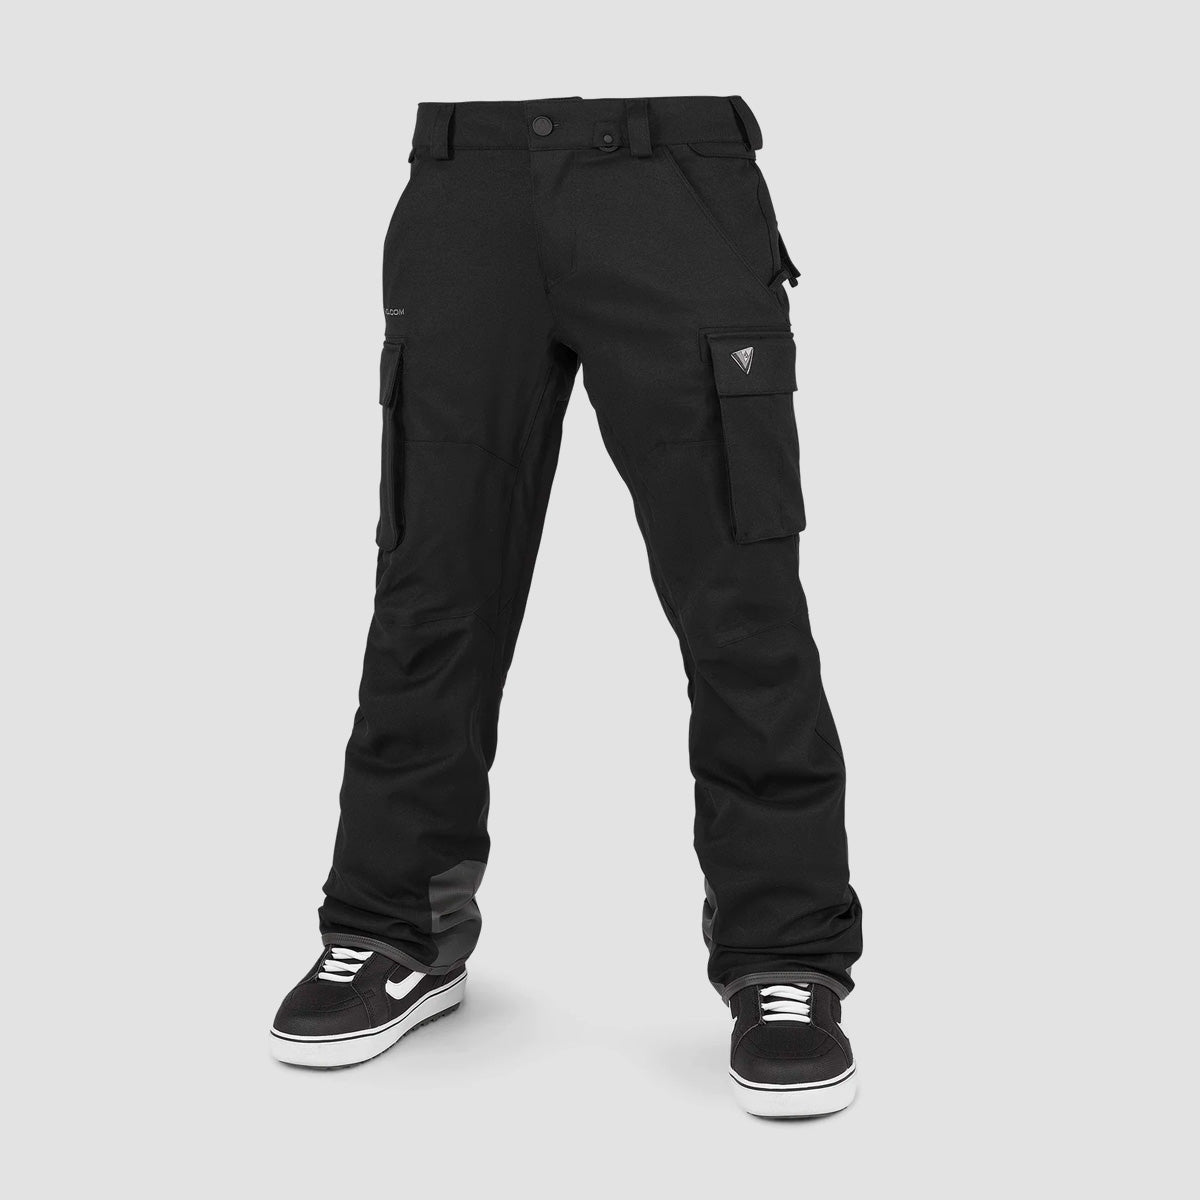 Volcom New Articulated Snow Pants Black